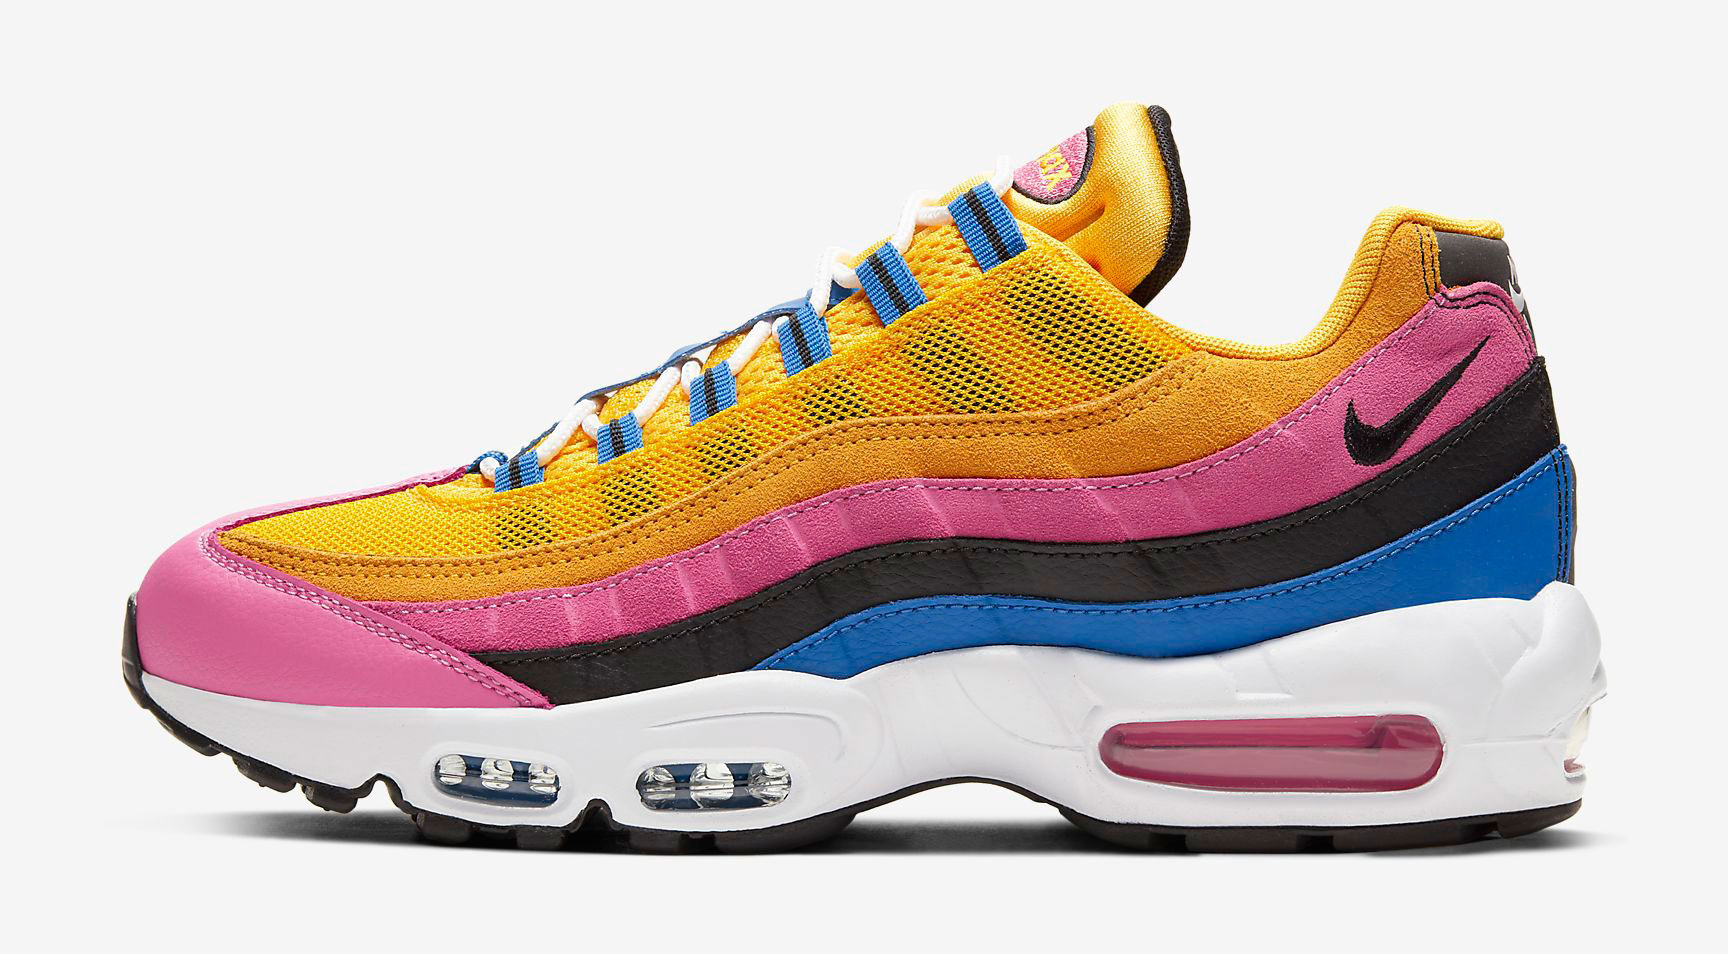 nike-air-max-95-university-gold-pinksicle-release-date